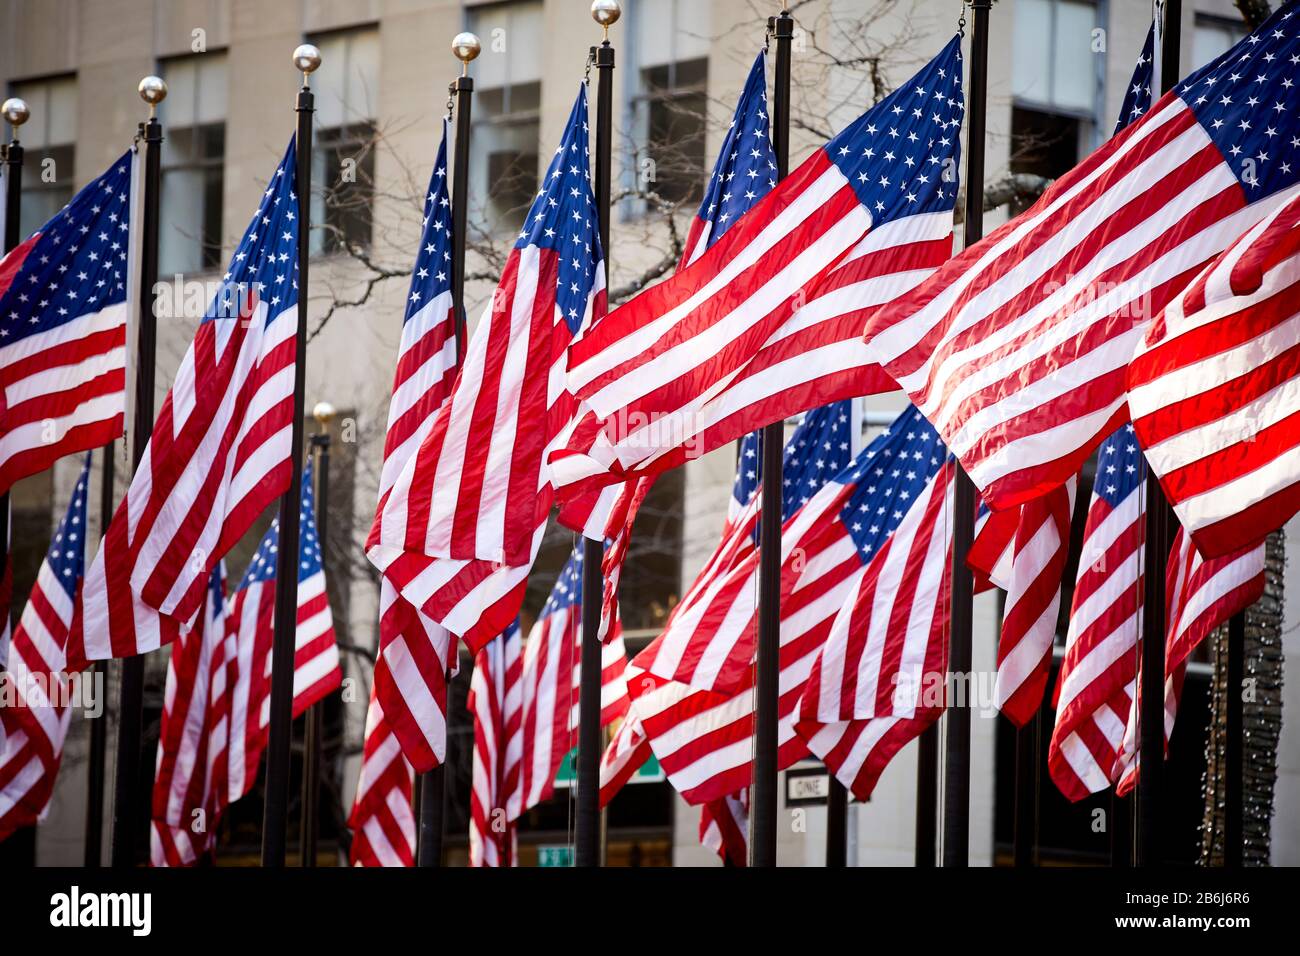 New York city Manhattan numerous American Starts and Stripes flags on flagpoles at Rockefeller Center Stock Photo